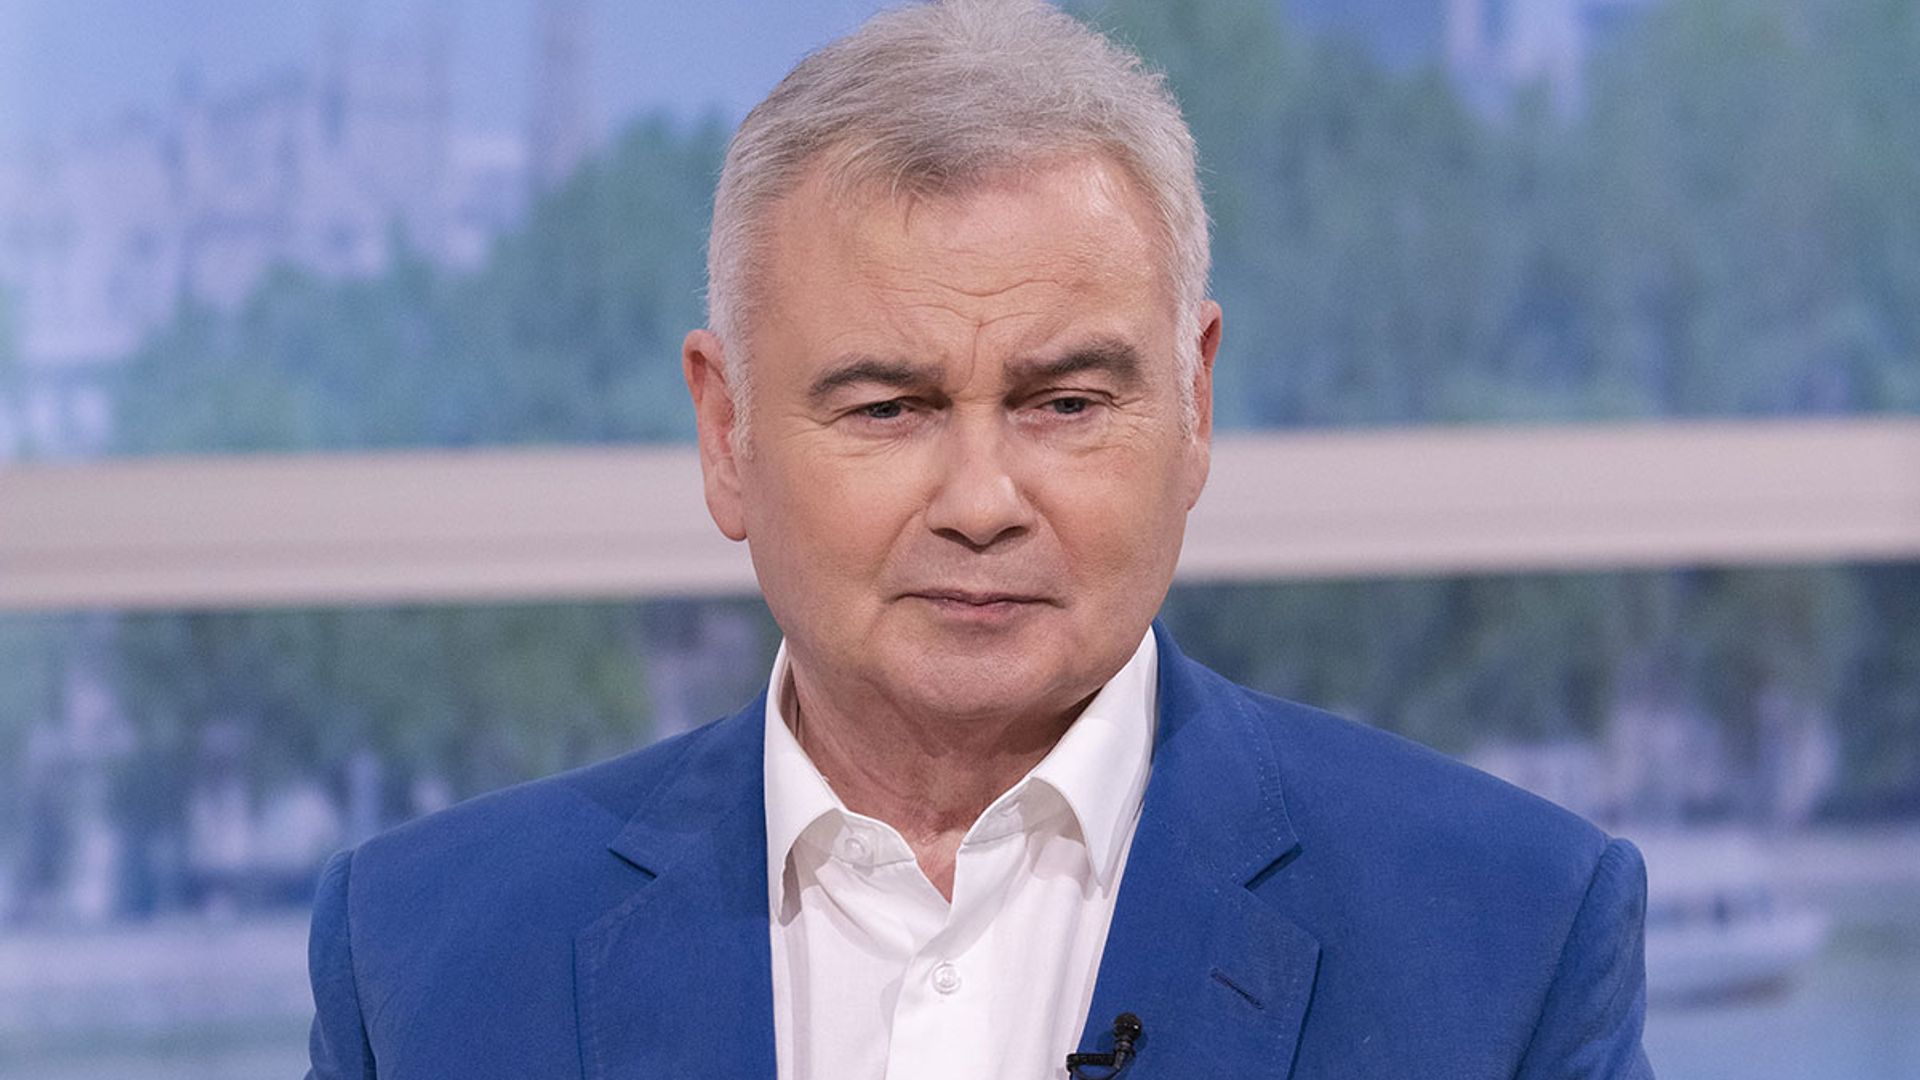 Eamonn Holmes impresses fans with burnout and stress story